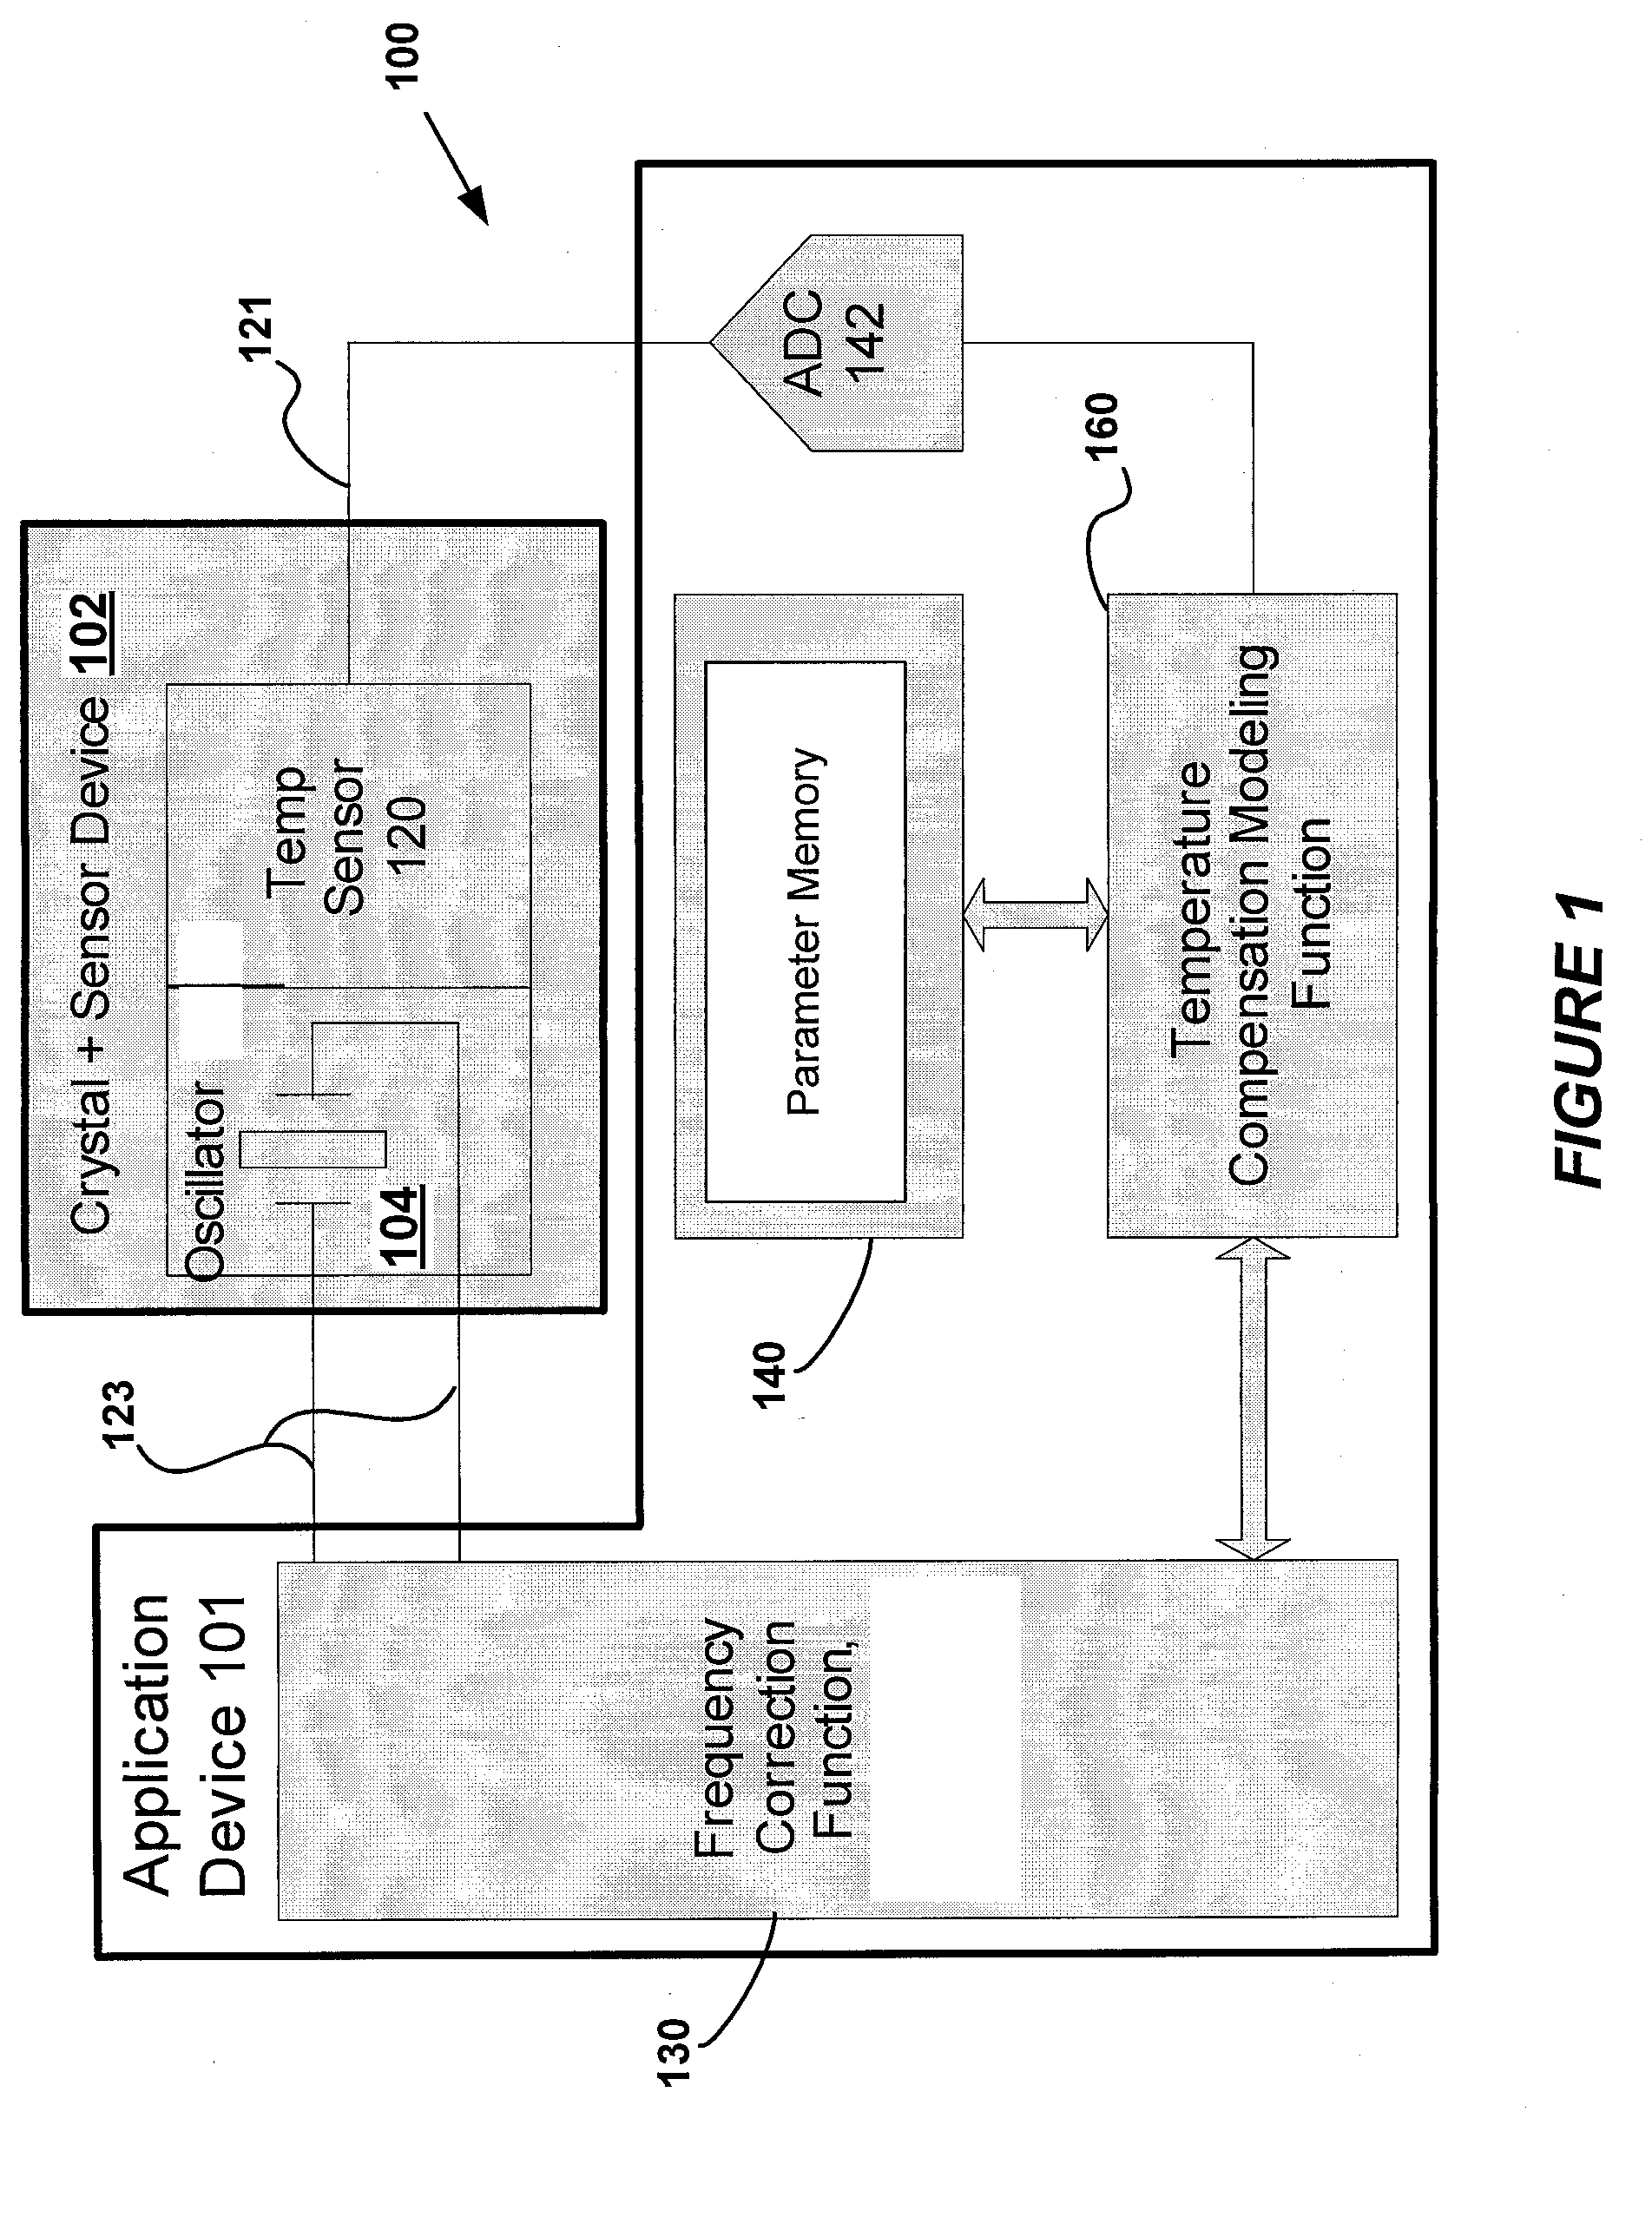 System and Method for Providing Temperature Correction in a Crystal Oscillator